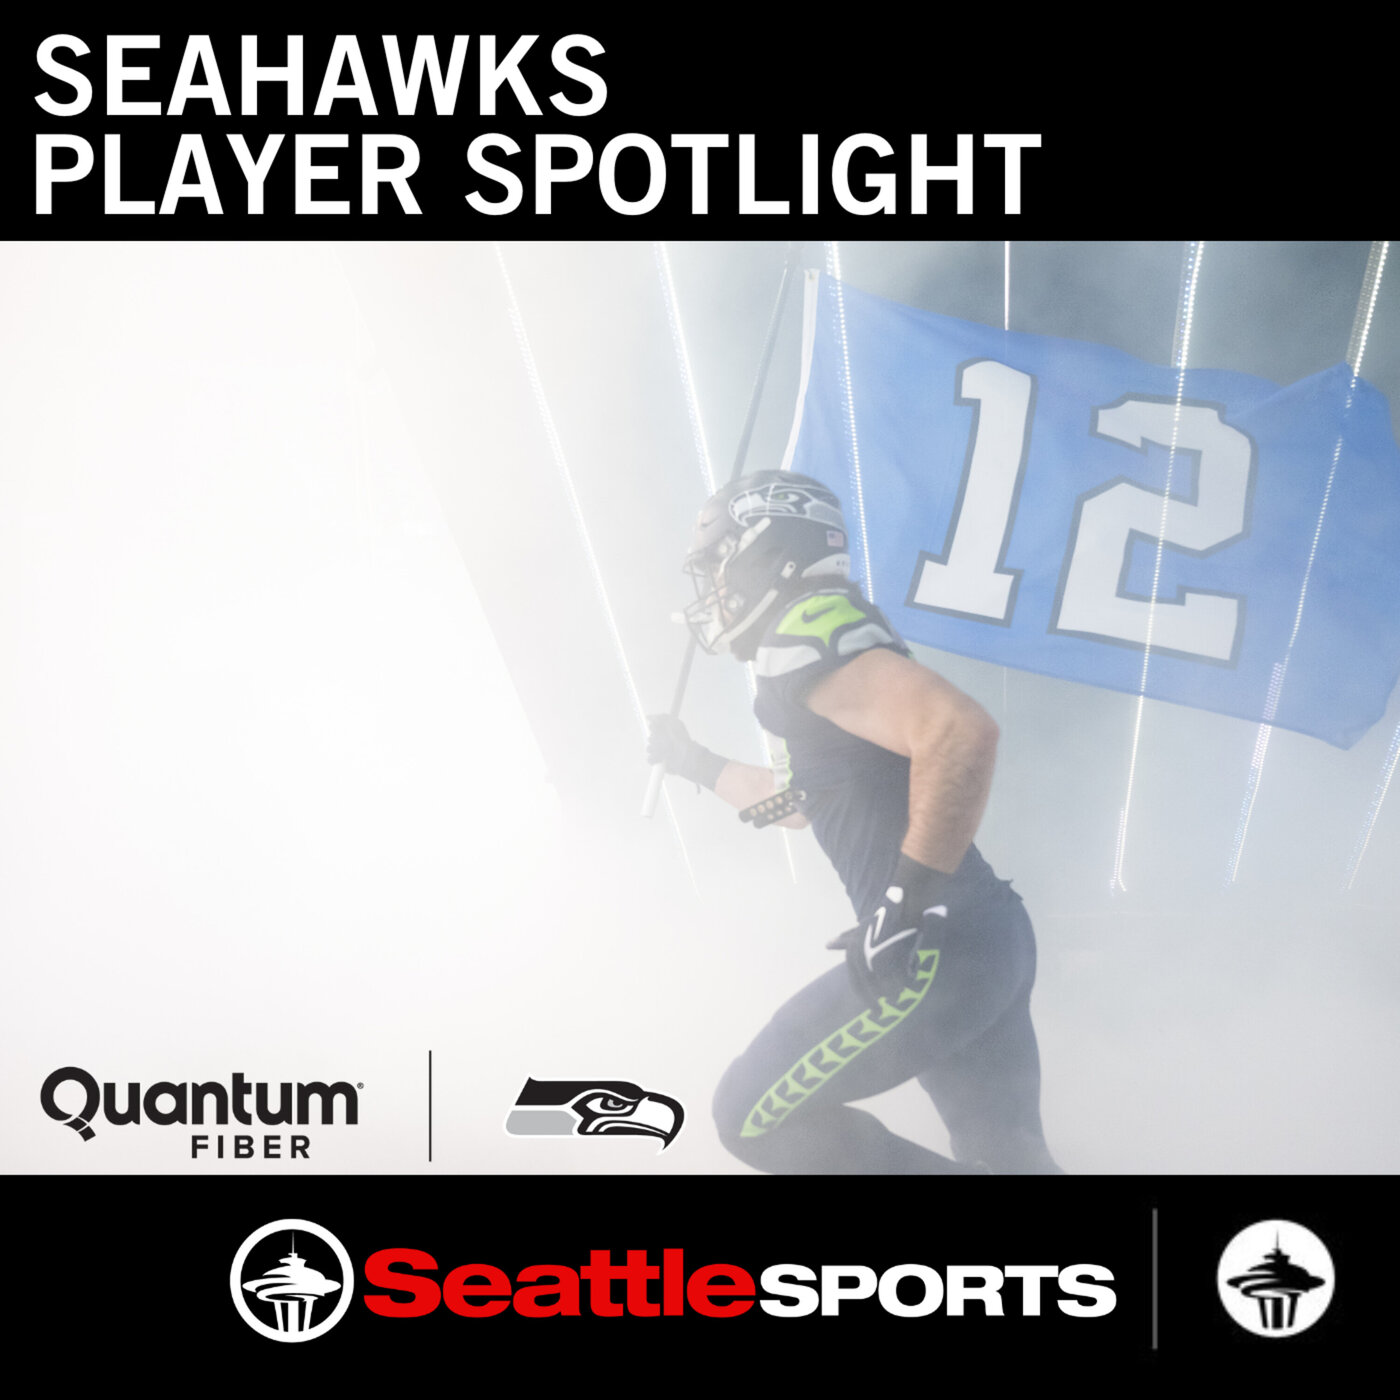 Seahawks Offensive Tackle Abe Lucas on getting back on the field